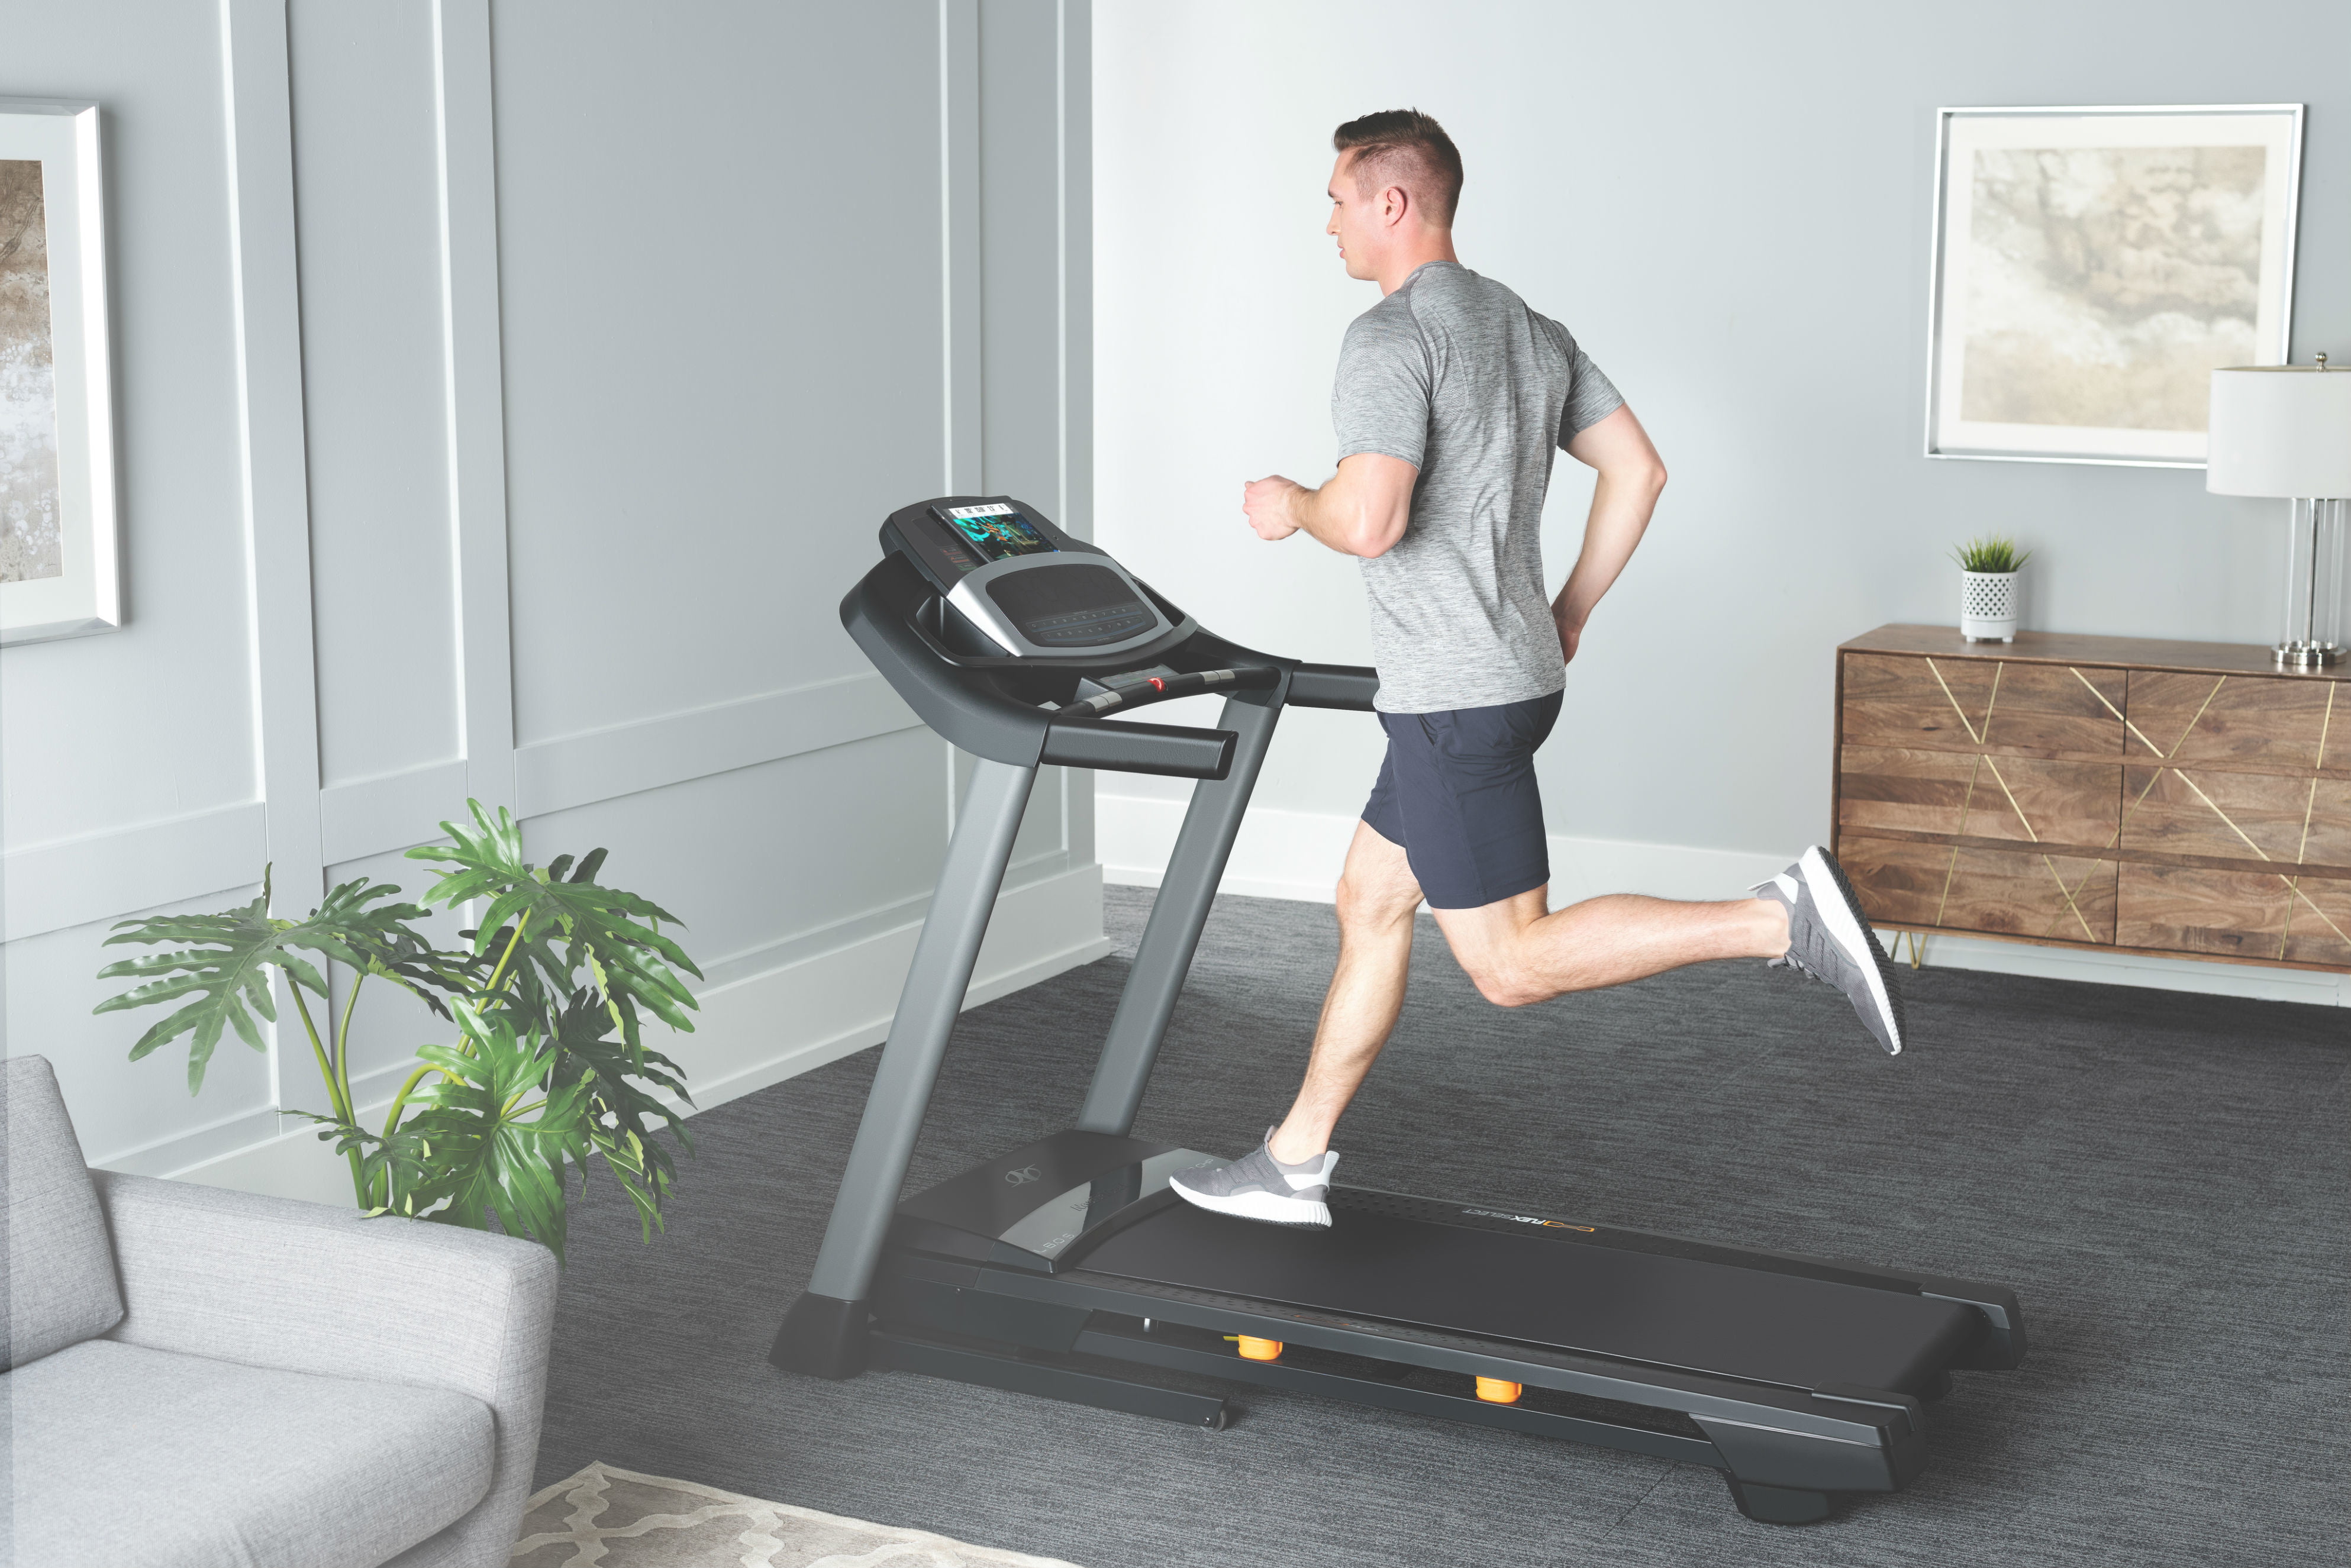 The Smart Shopper�s Treadmill Buying Guide